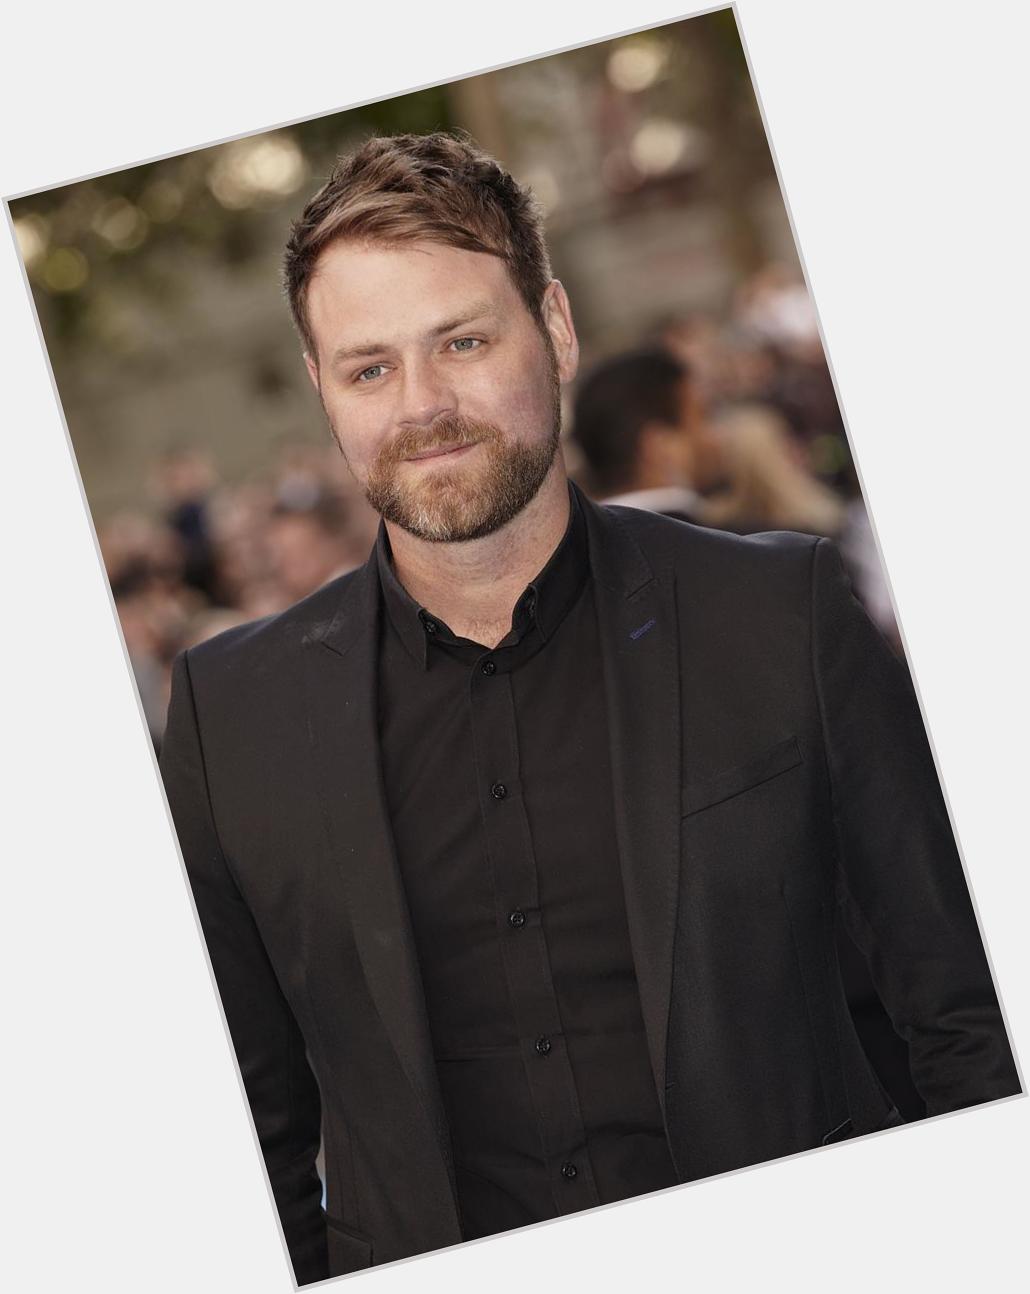 HAPPY 37th birthday Mr Brian Mcfadden  wishing you a best birthday ever!! God bless you more idollove you    